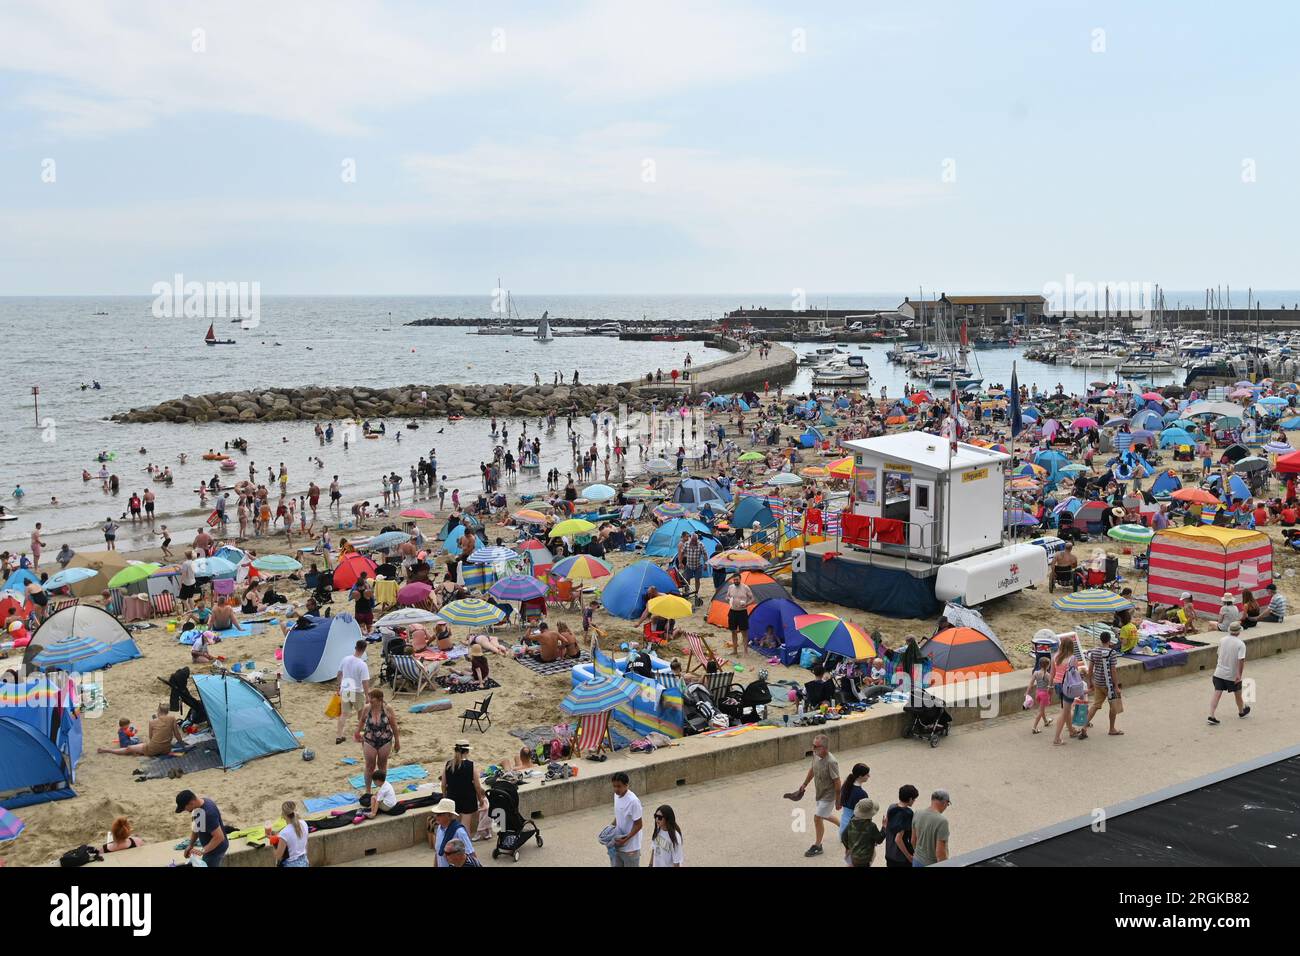 Lyme Regis. On a very hot and humid afternoon hundreds of people are seen on a fully packed beach and in the sea and sailing yachts' .Picture Credit: Robert Timoney/Alamy Live News Stock Photo